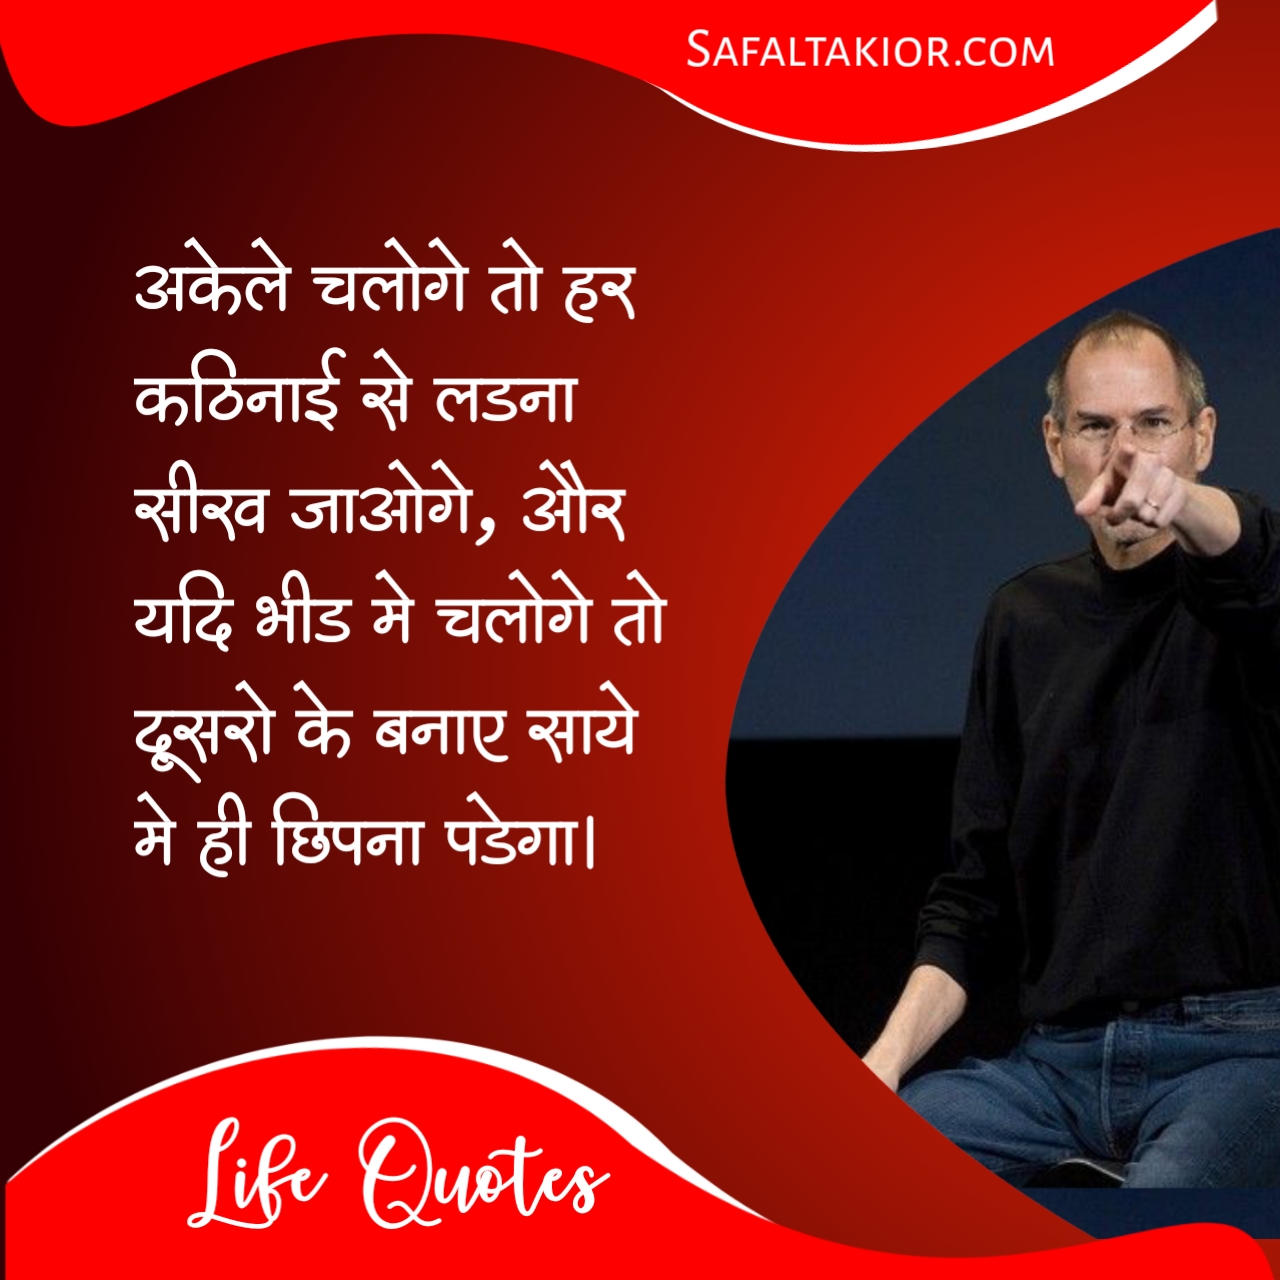 bitter truth of life quotes in hindi